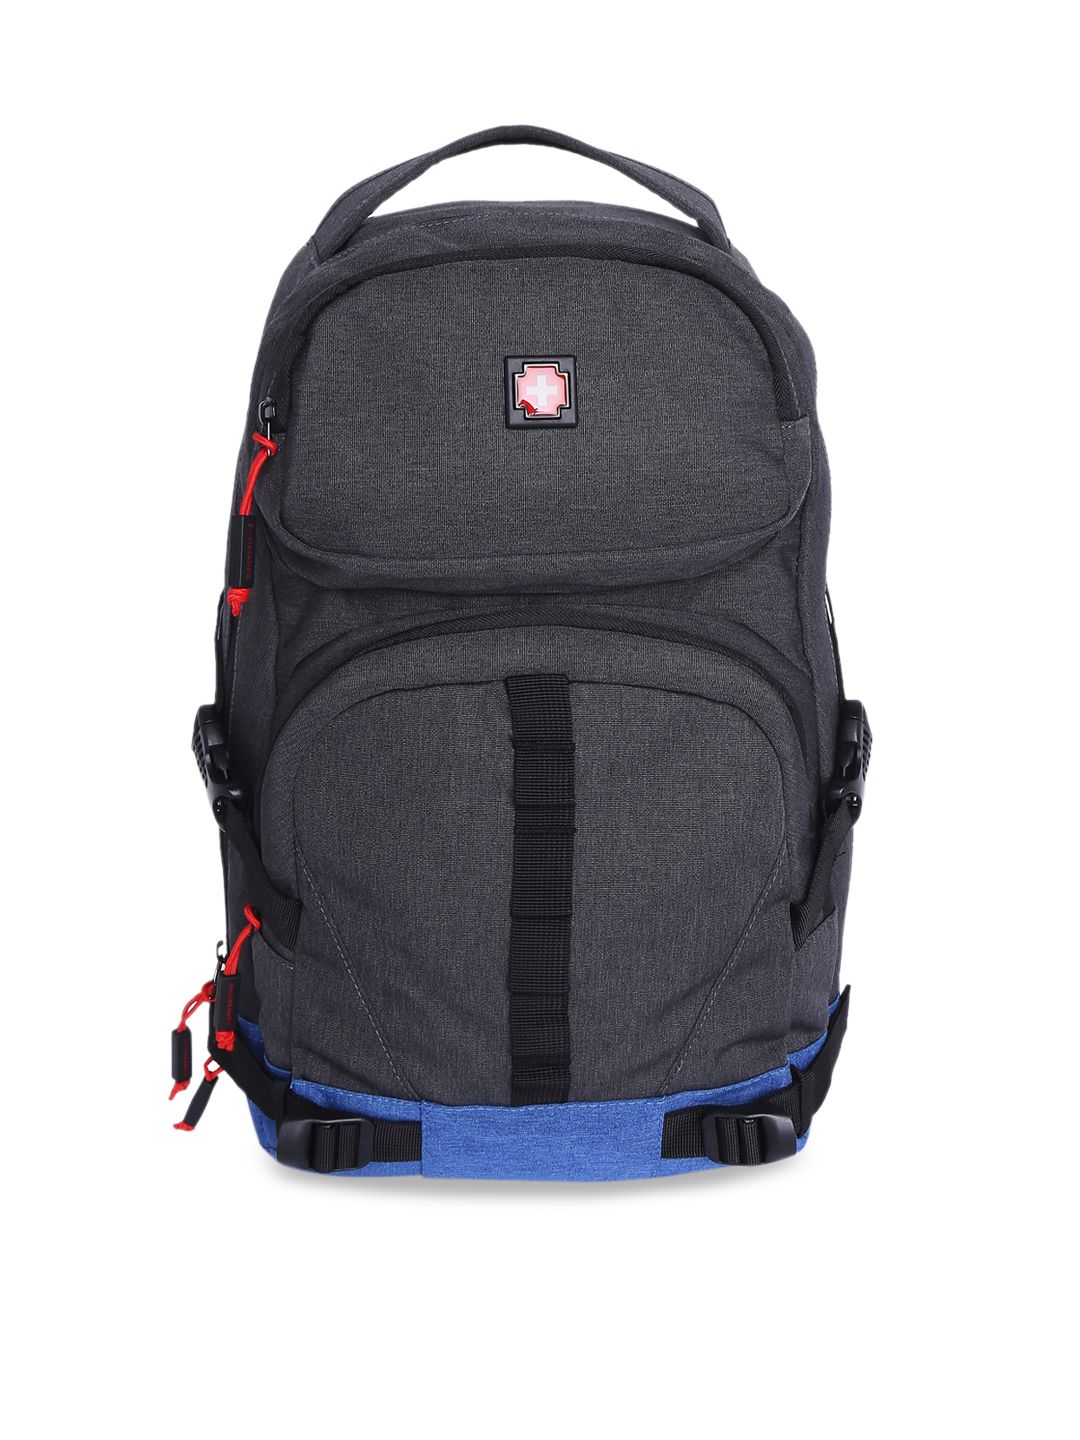 SWISS BRAND Unisex Grey & Blue Solid Maine Daypack Range Backpack Price in India